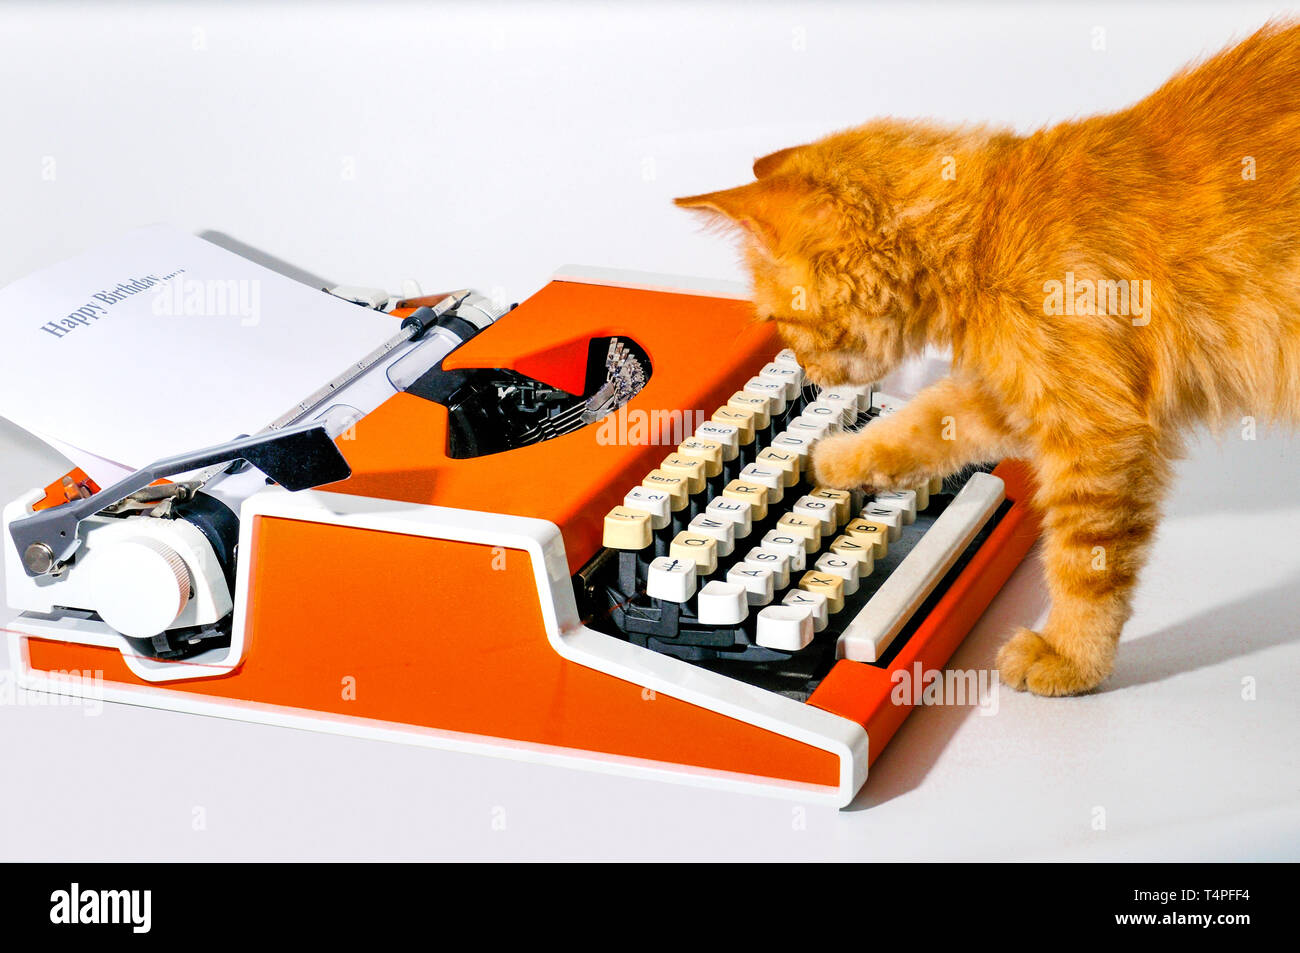 Little fluffy, red, like a fox, the kitten is played with an orange machine for printing Stock Photo